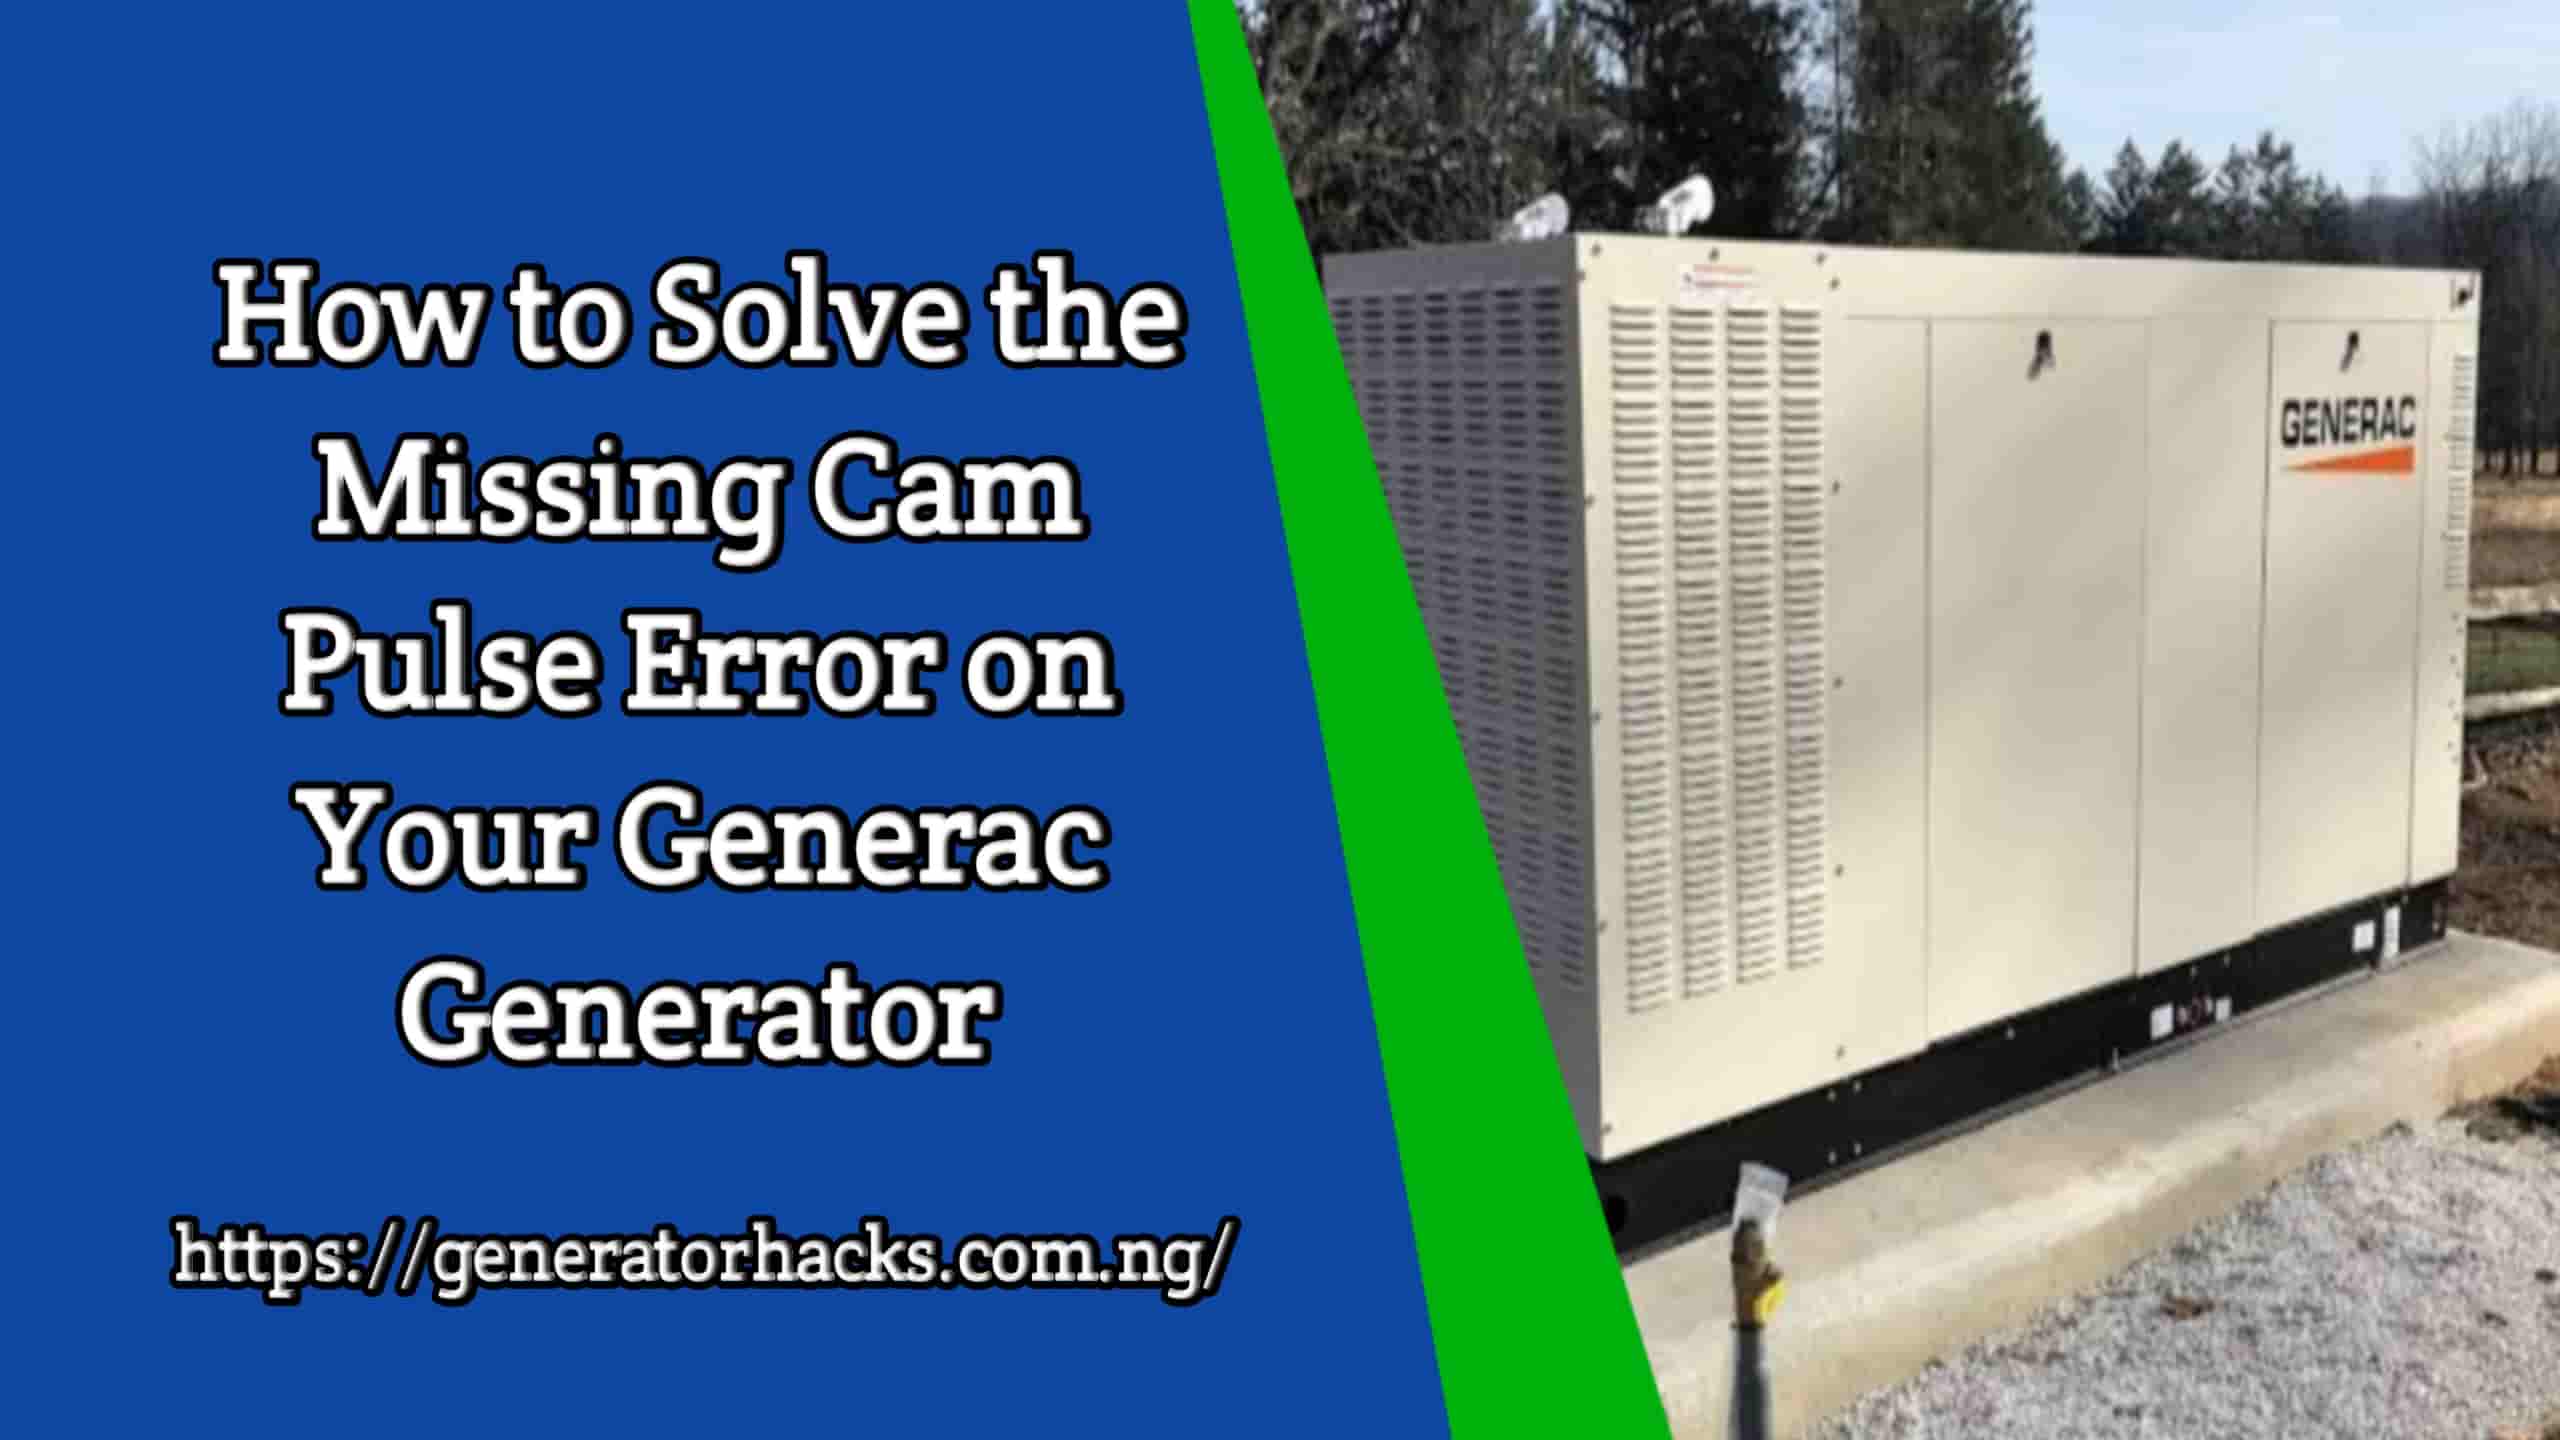 How to Solve the Missing Cam Pulse Error on Your Generac Generator